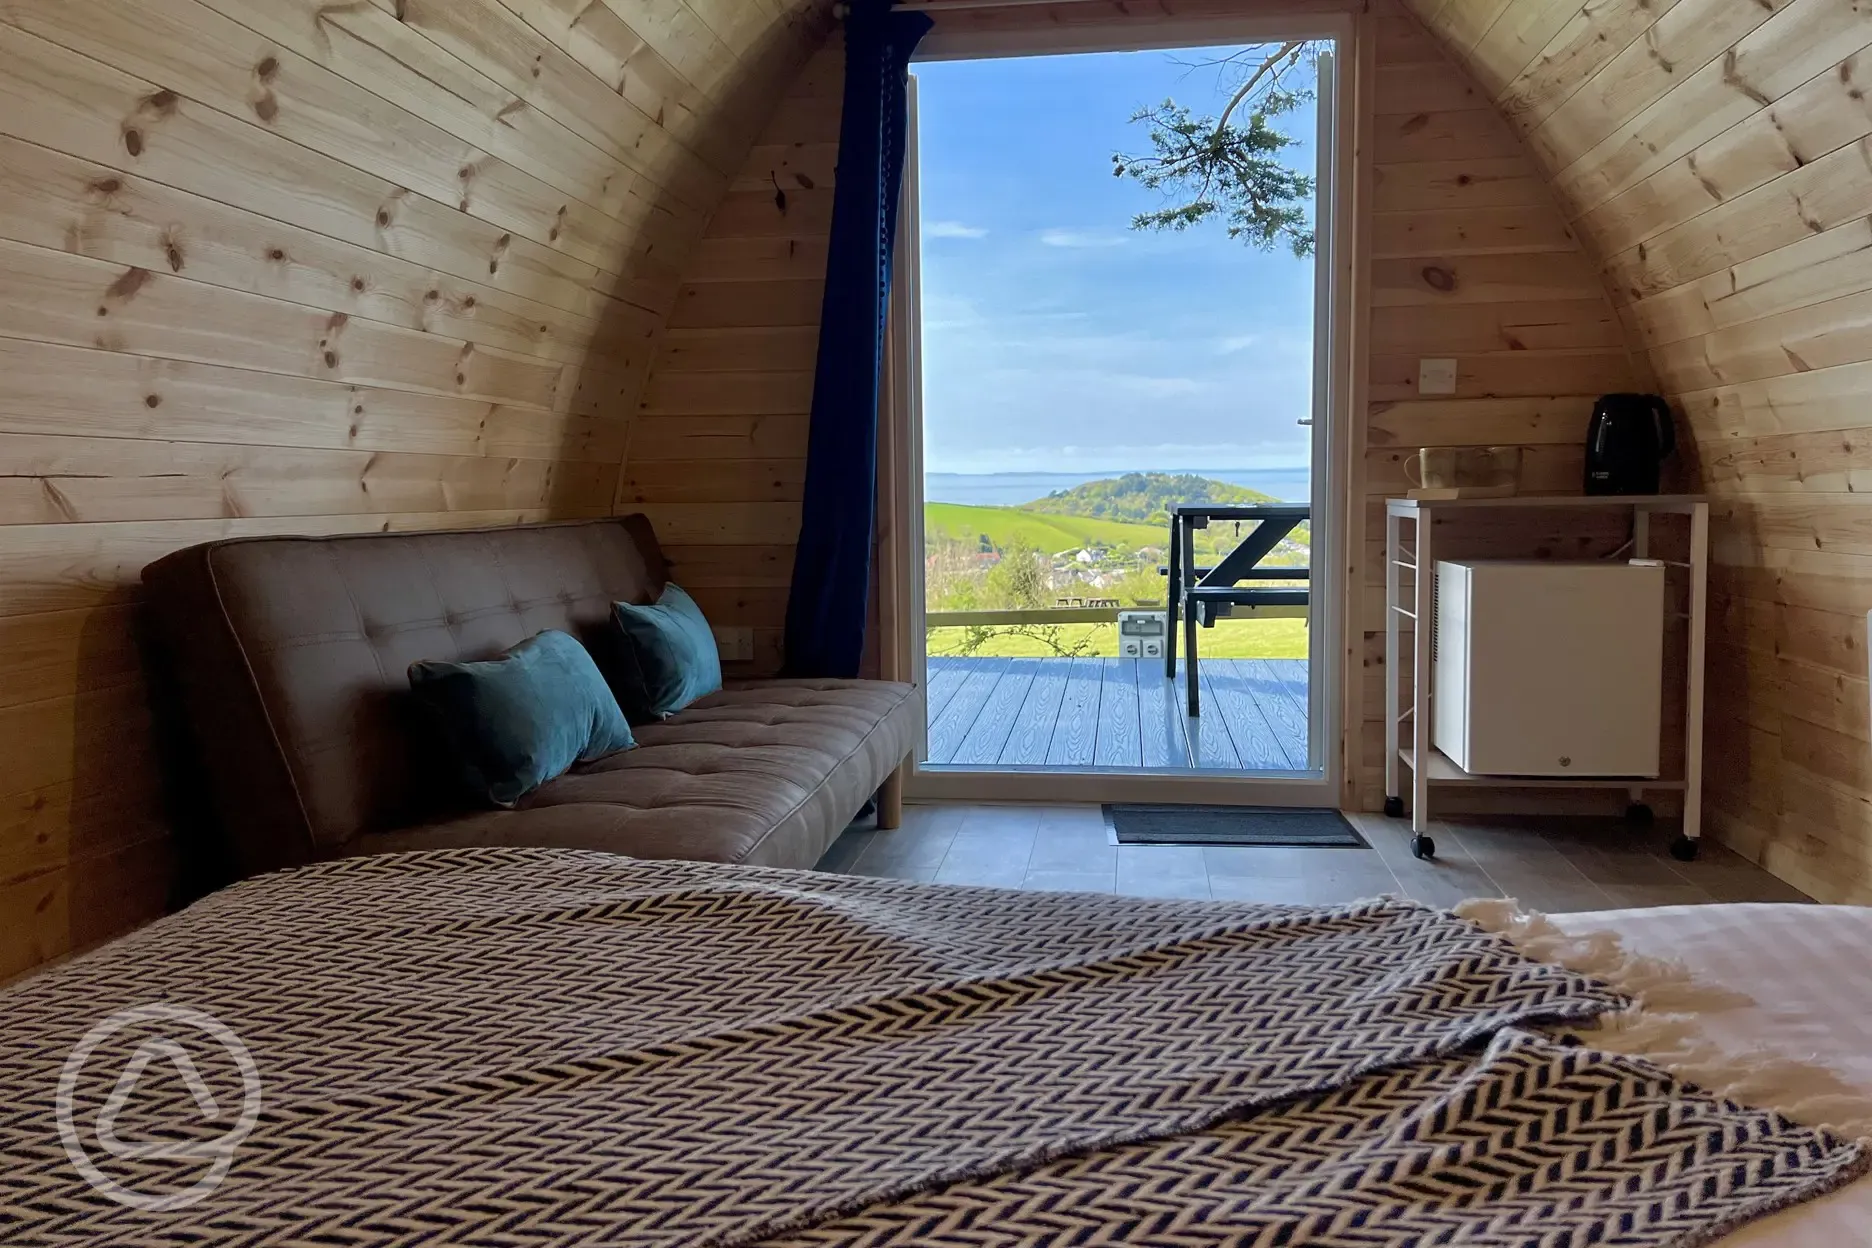 View from inside the glamping pod with sea views (Pet Free) - interior